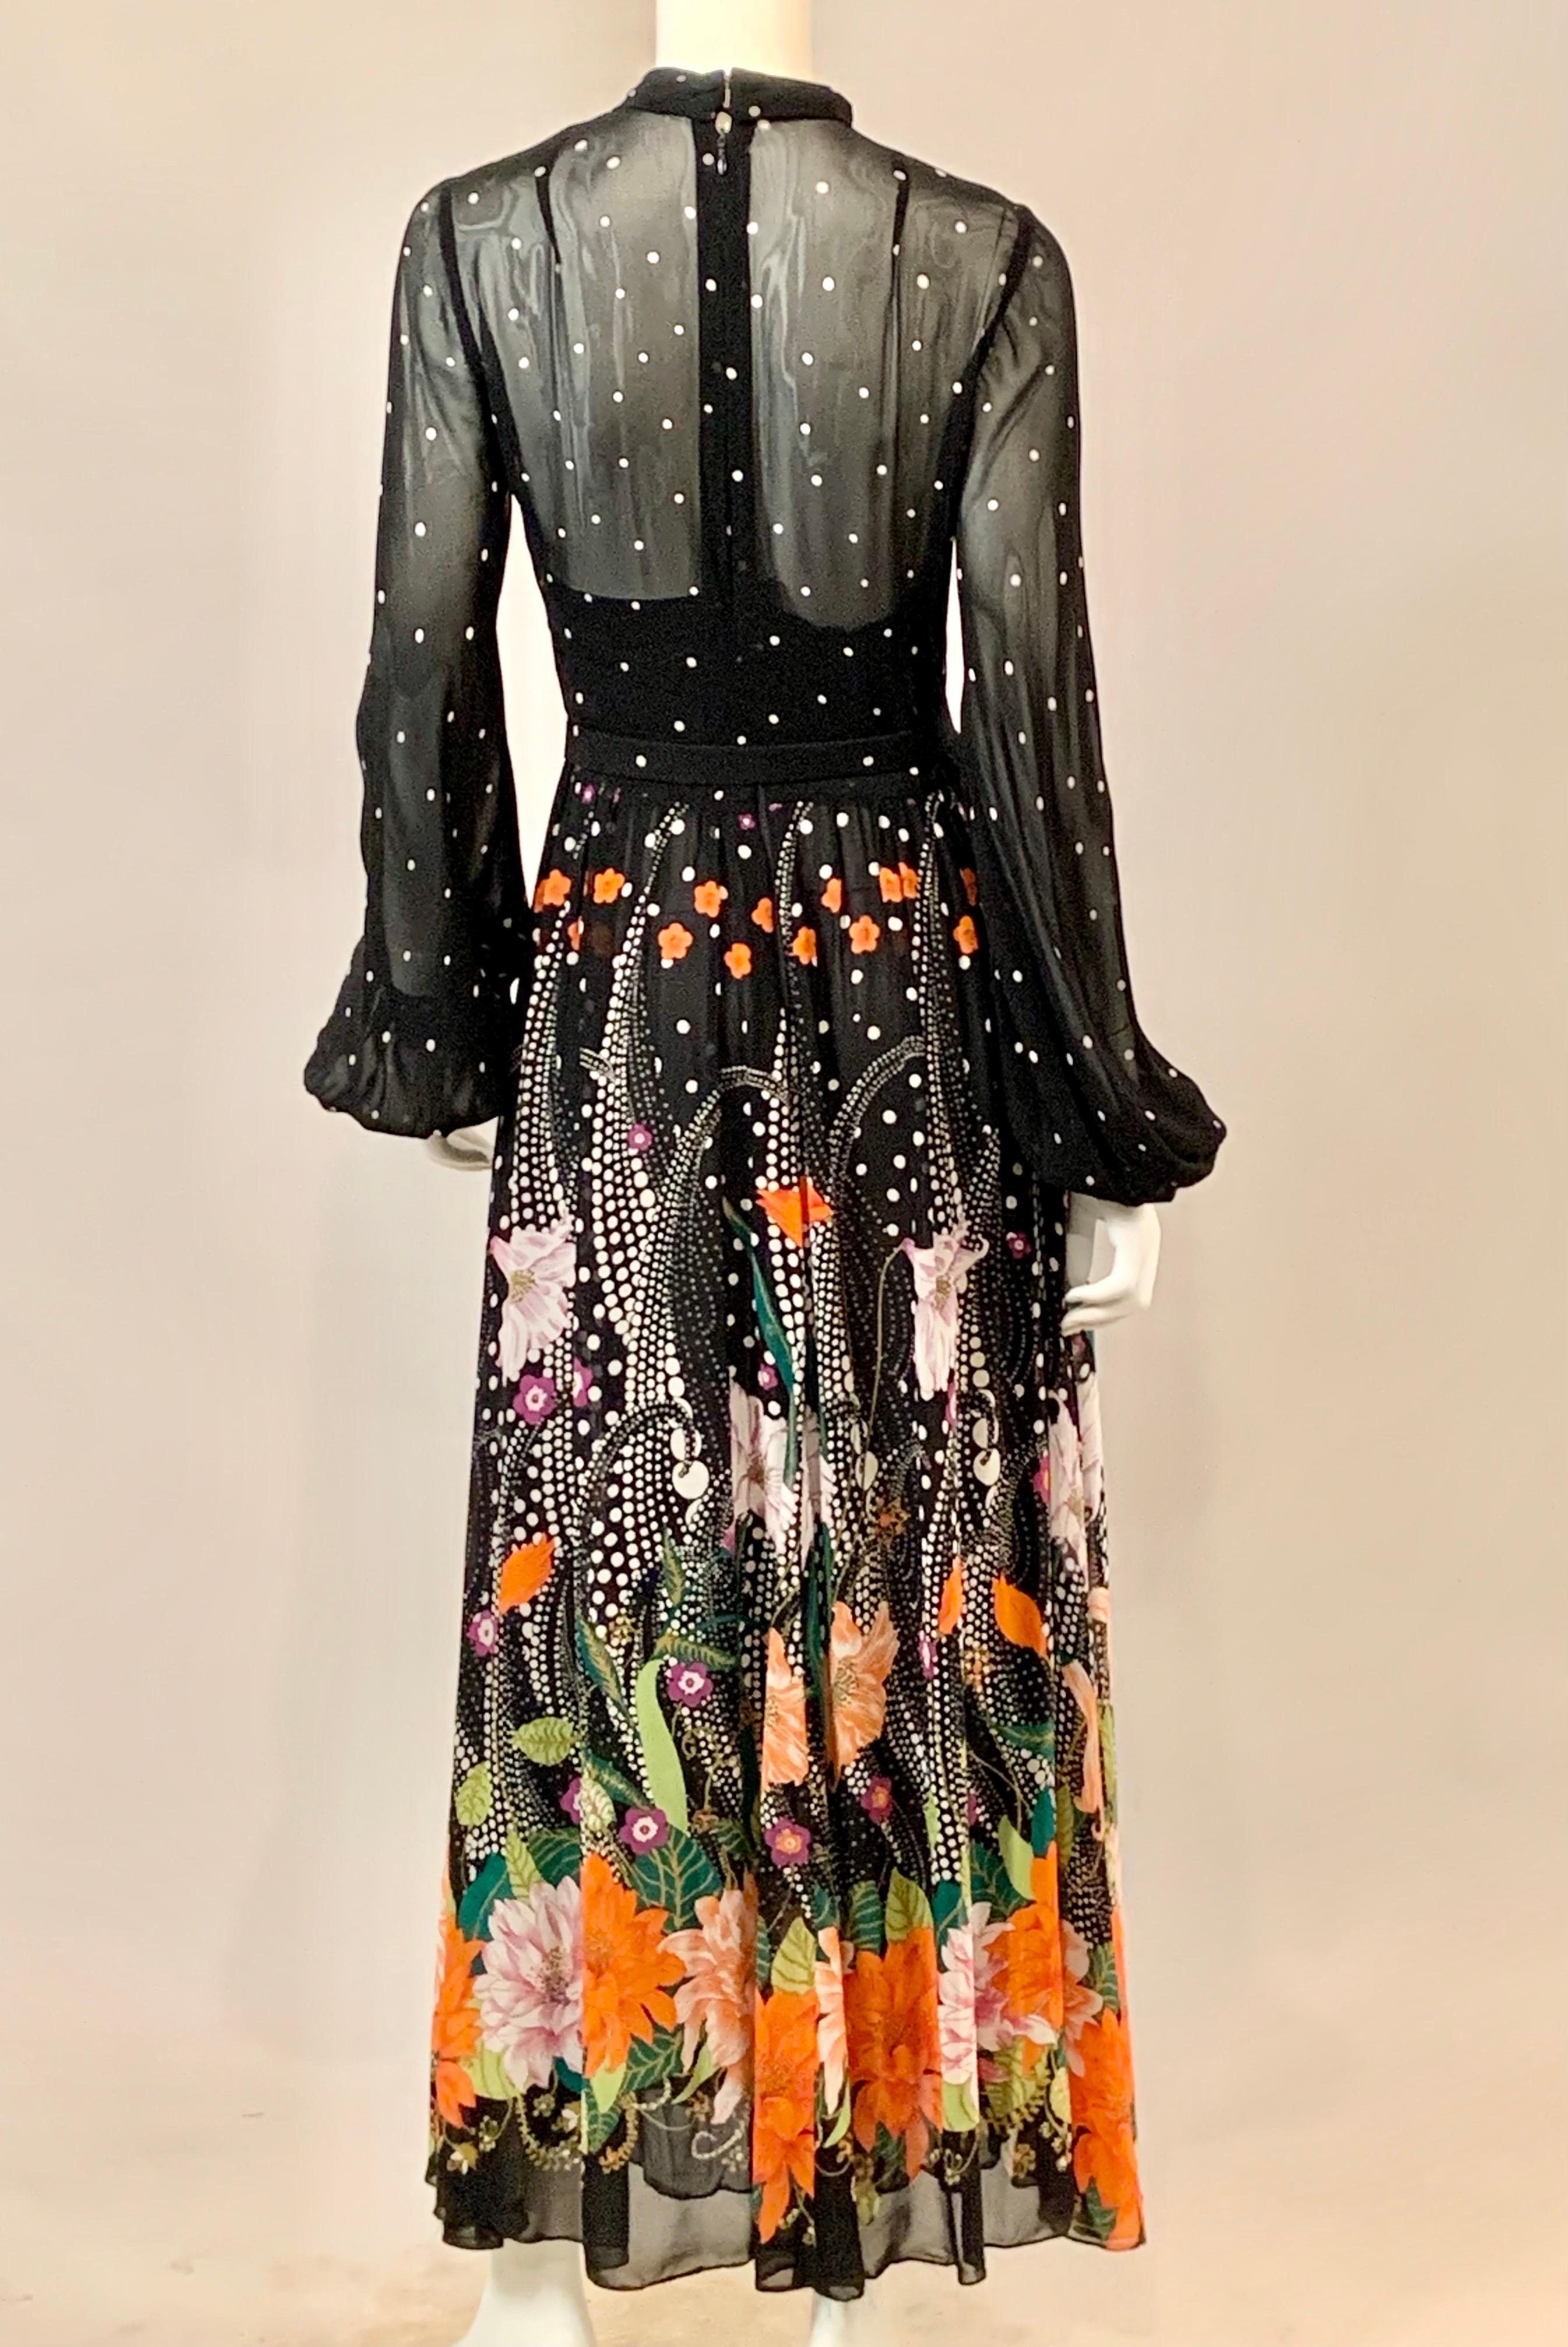 1970's Chiffon Maxi Dress with a Polka Dot and Flower Print For Sale 2